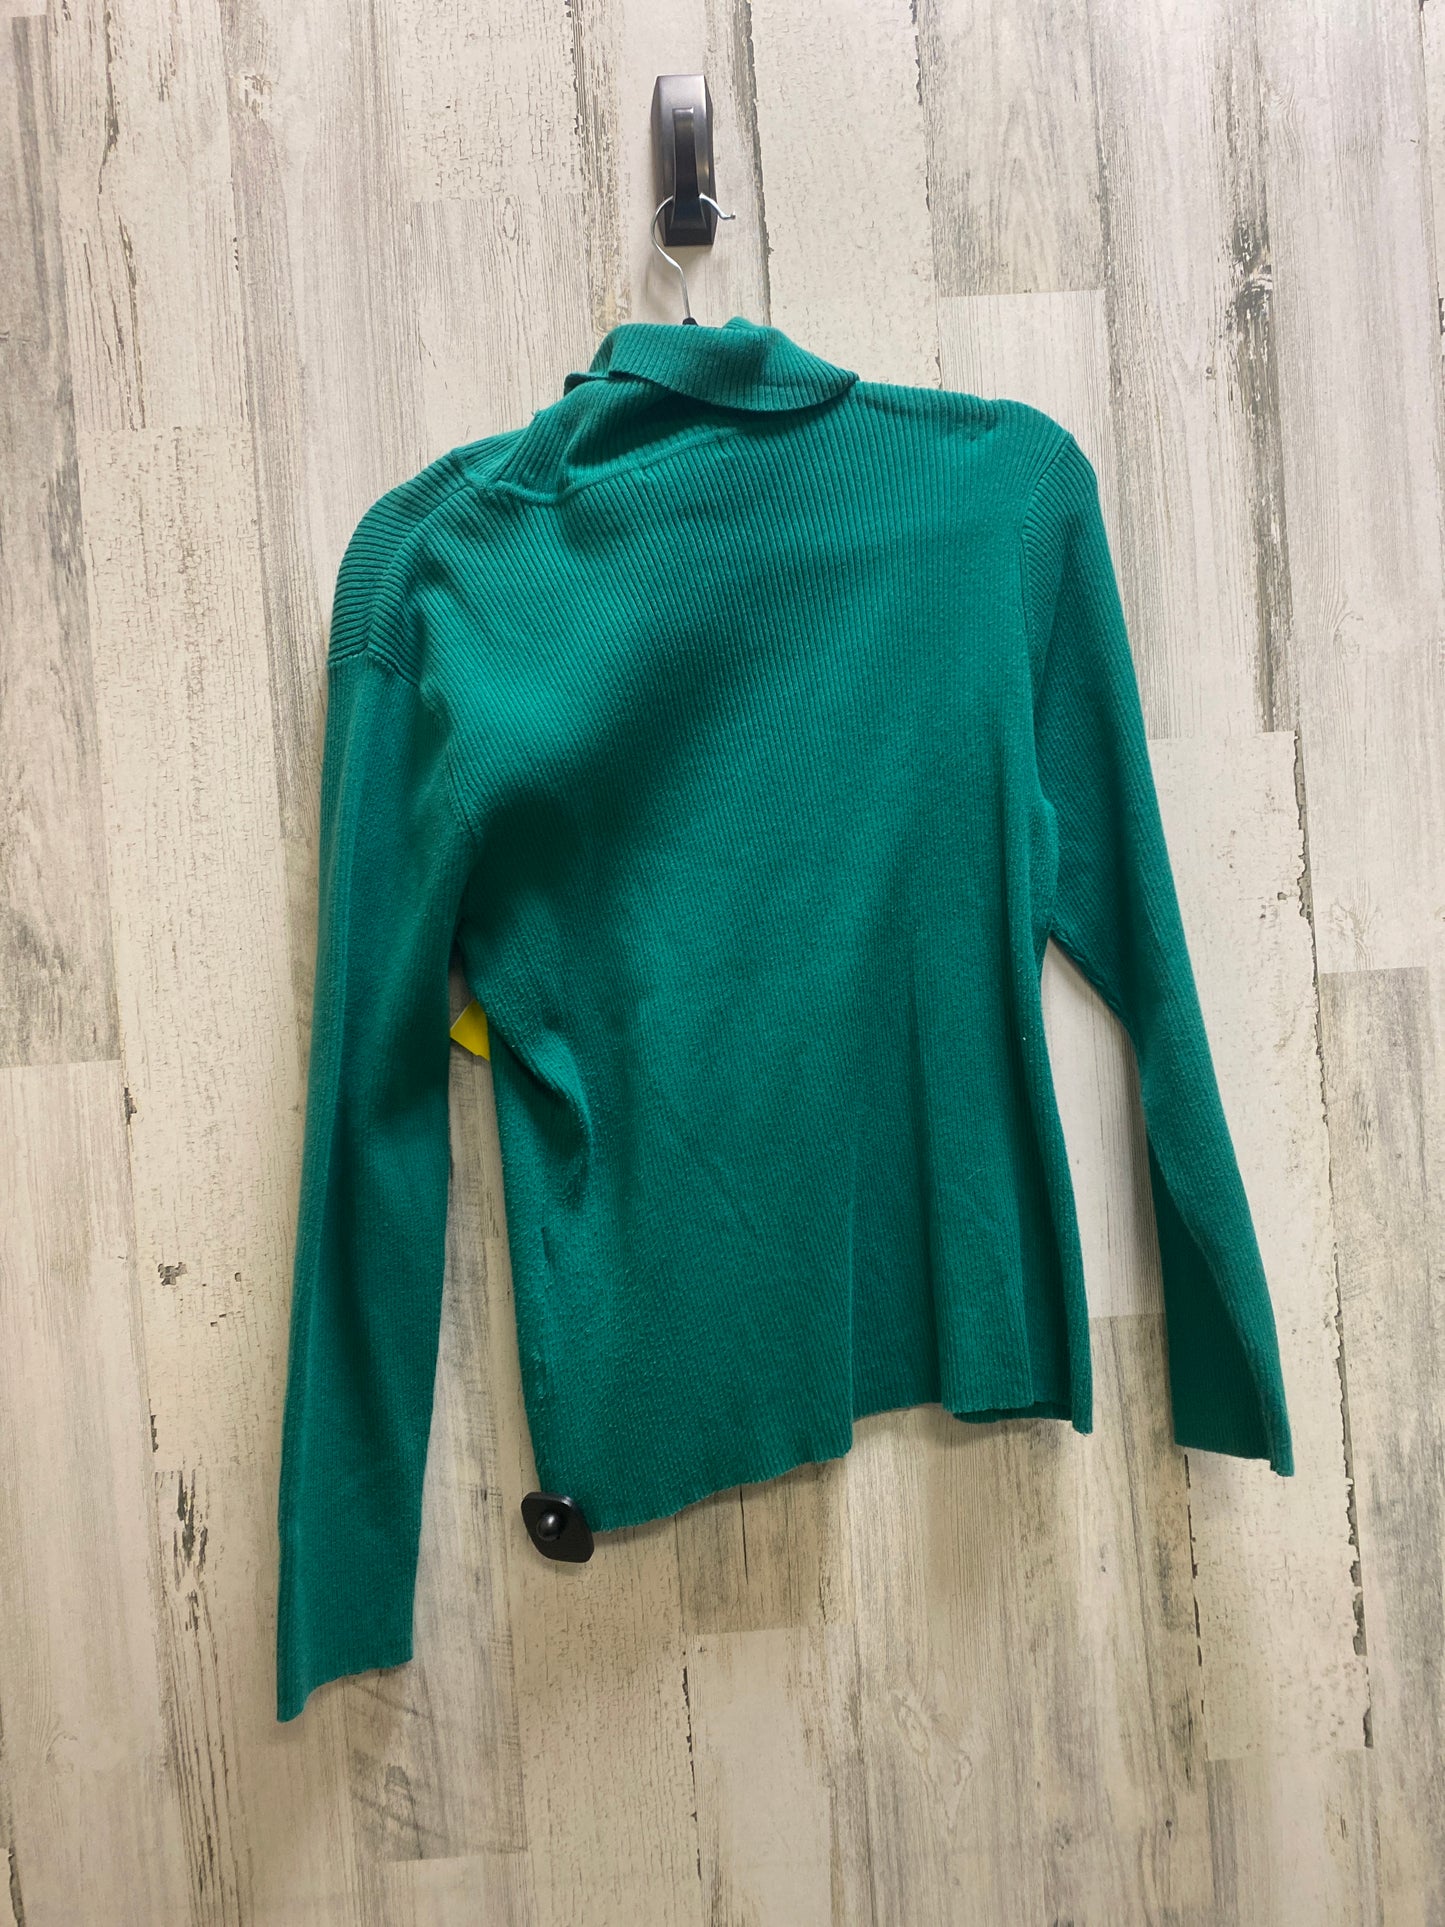 Sweater By Style And Company  Size: Xl